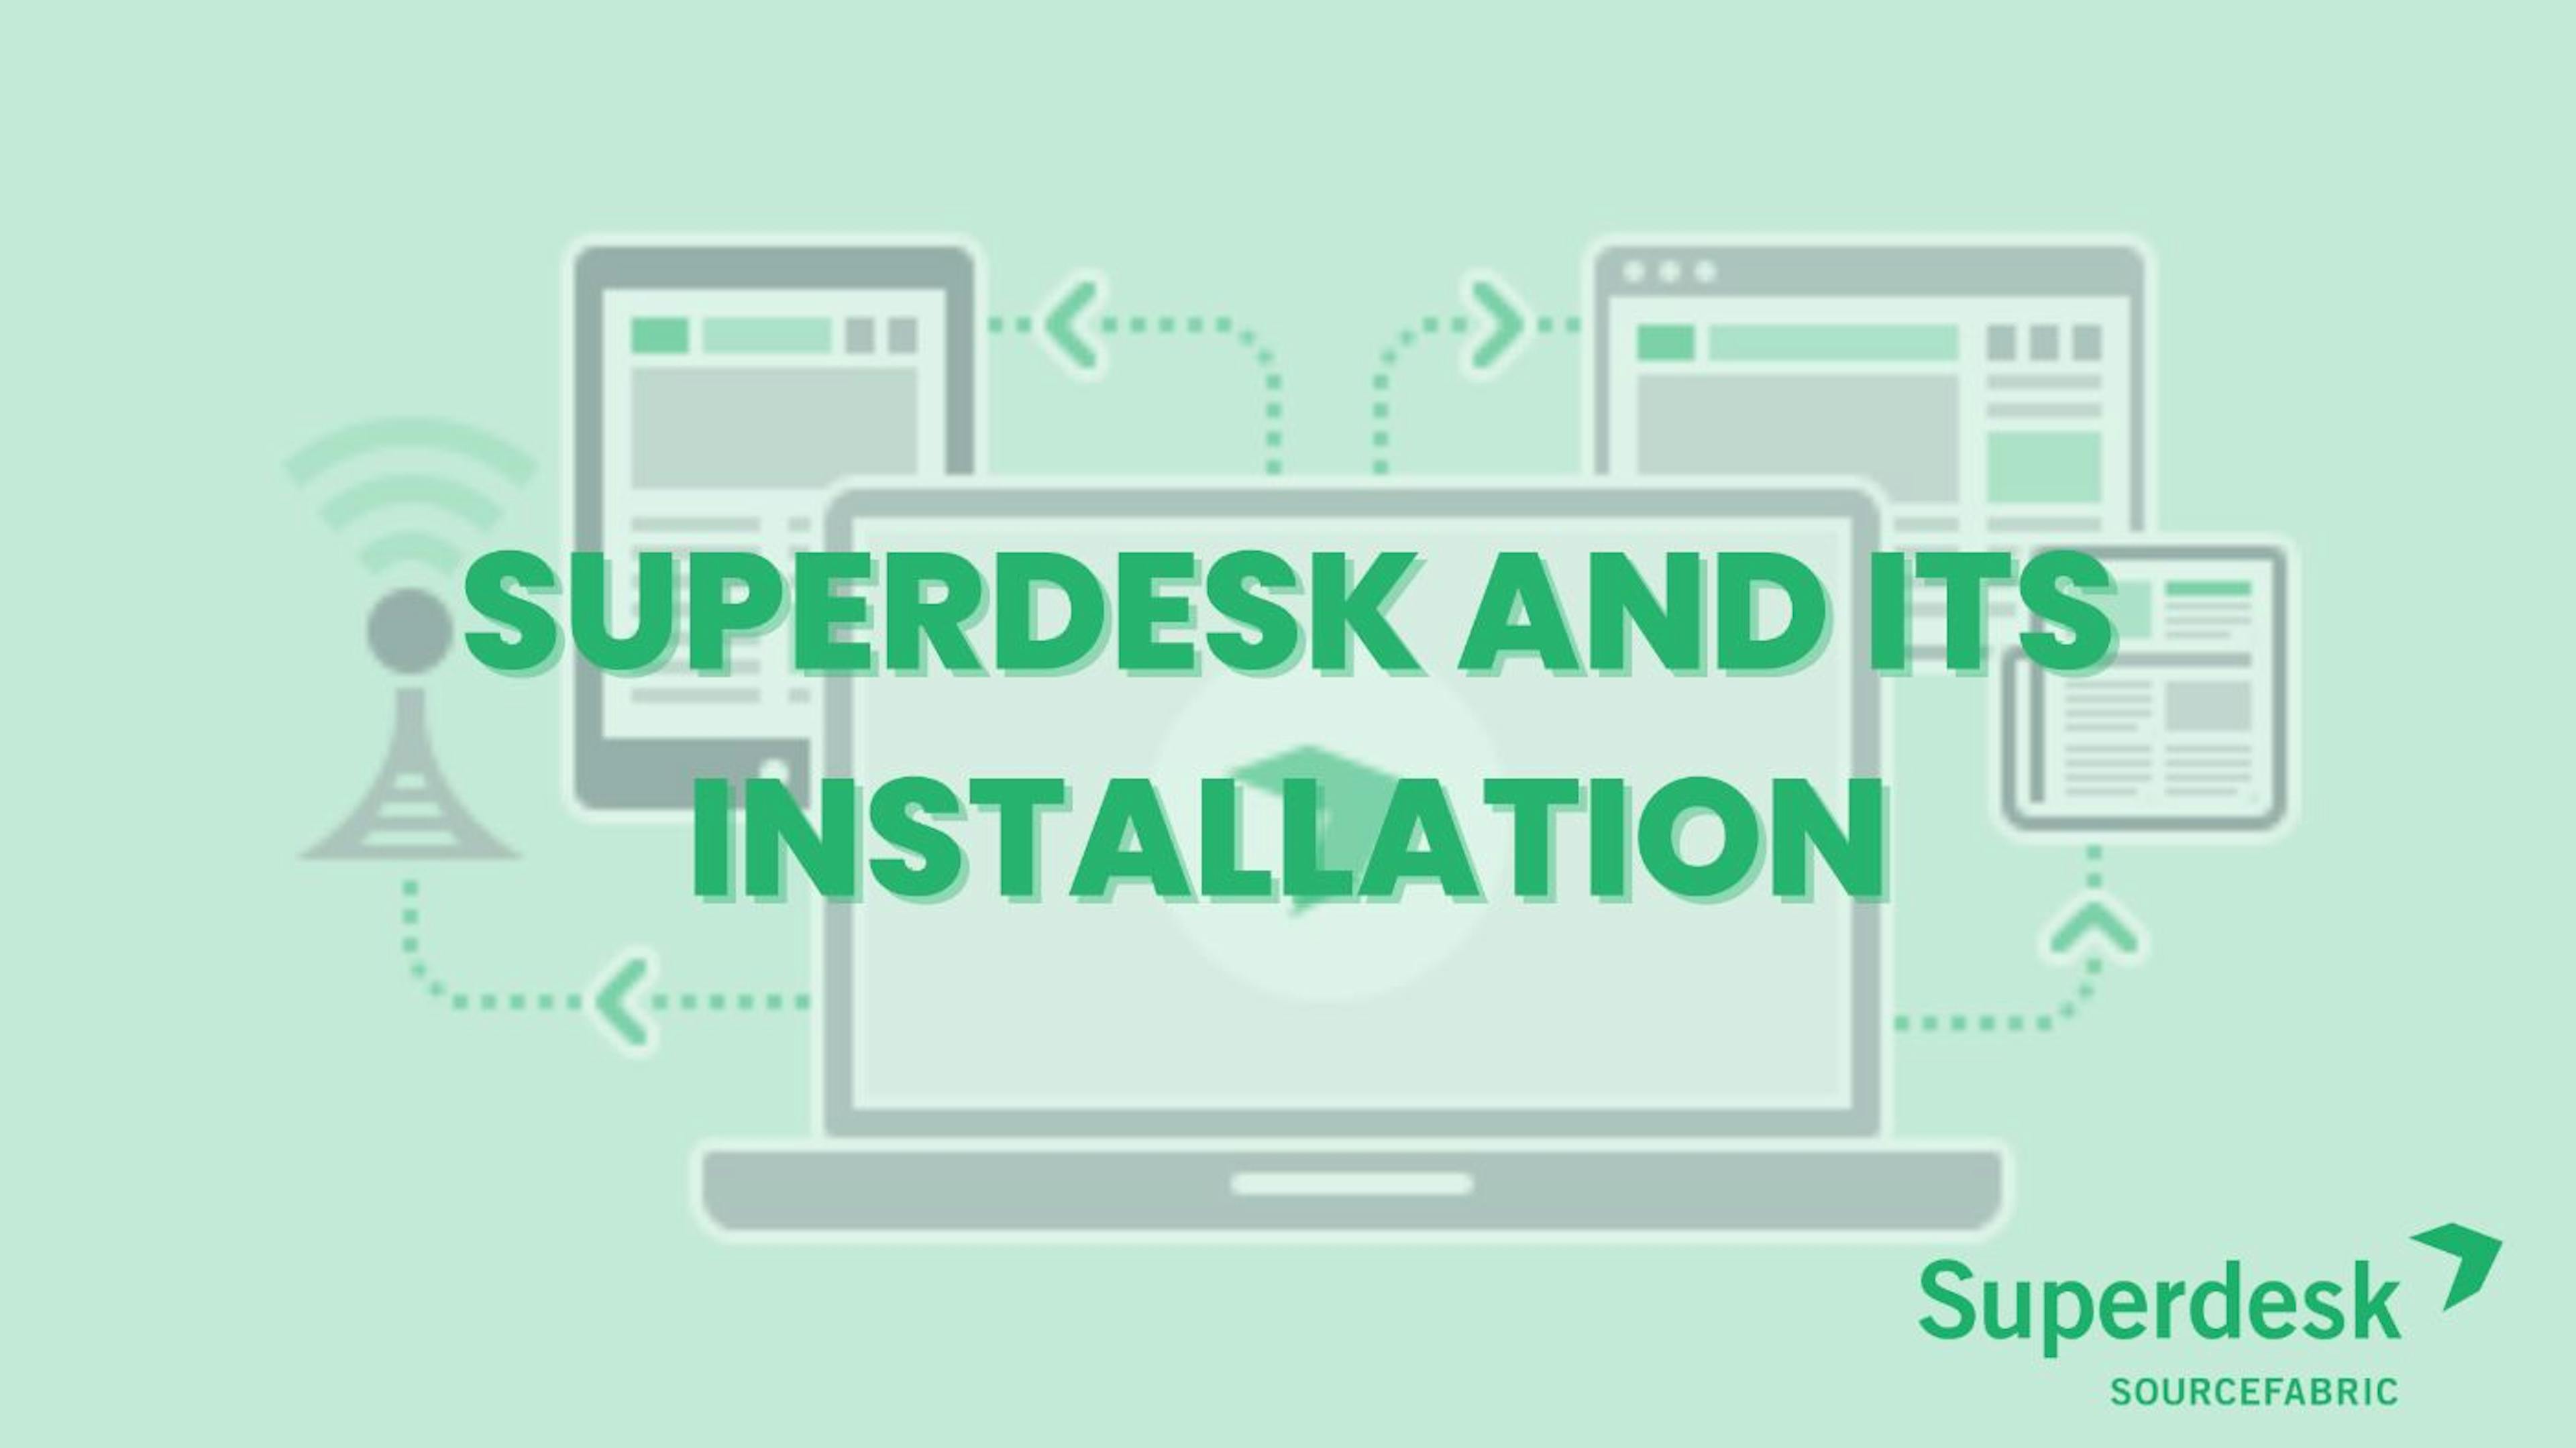 featured image - Superdesk and its Installation